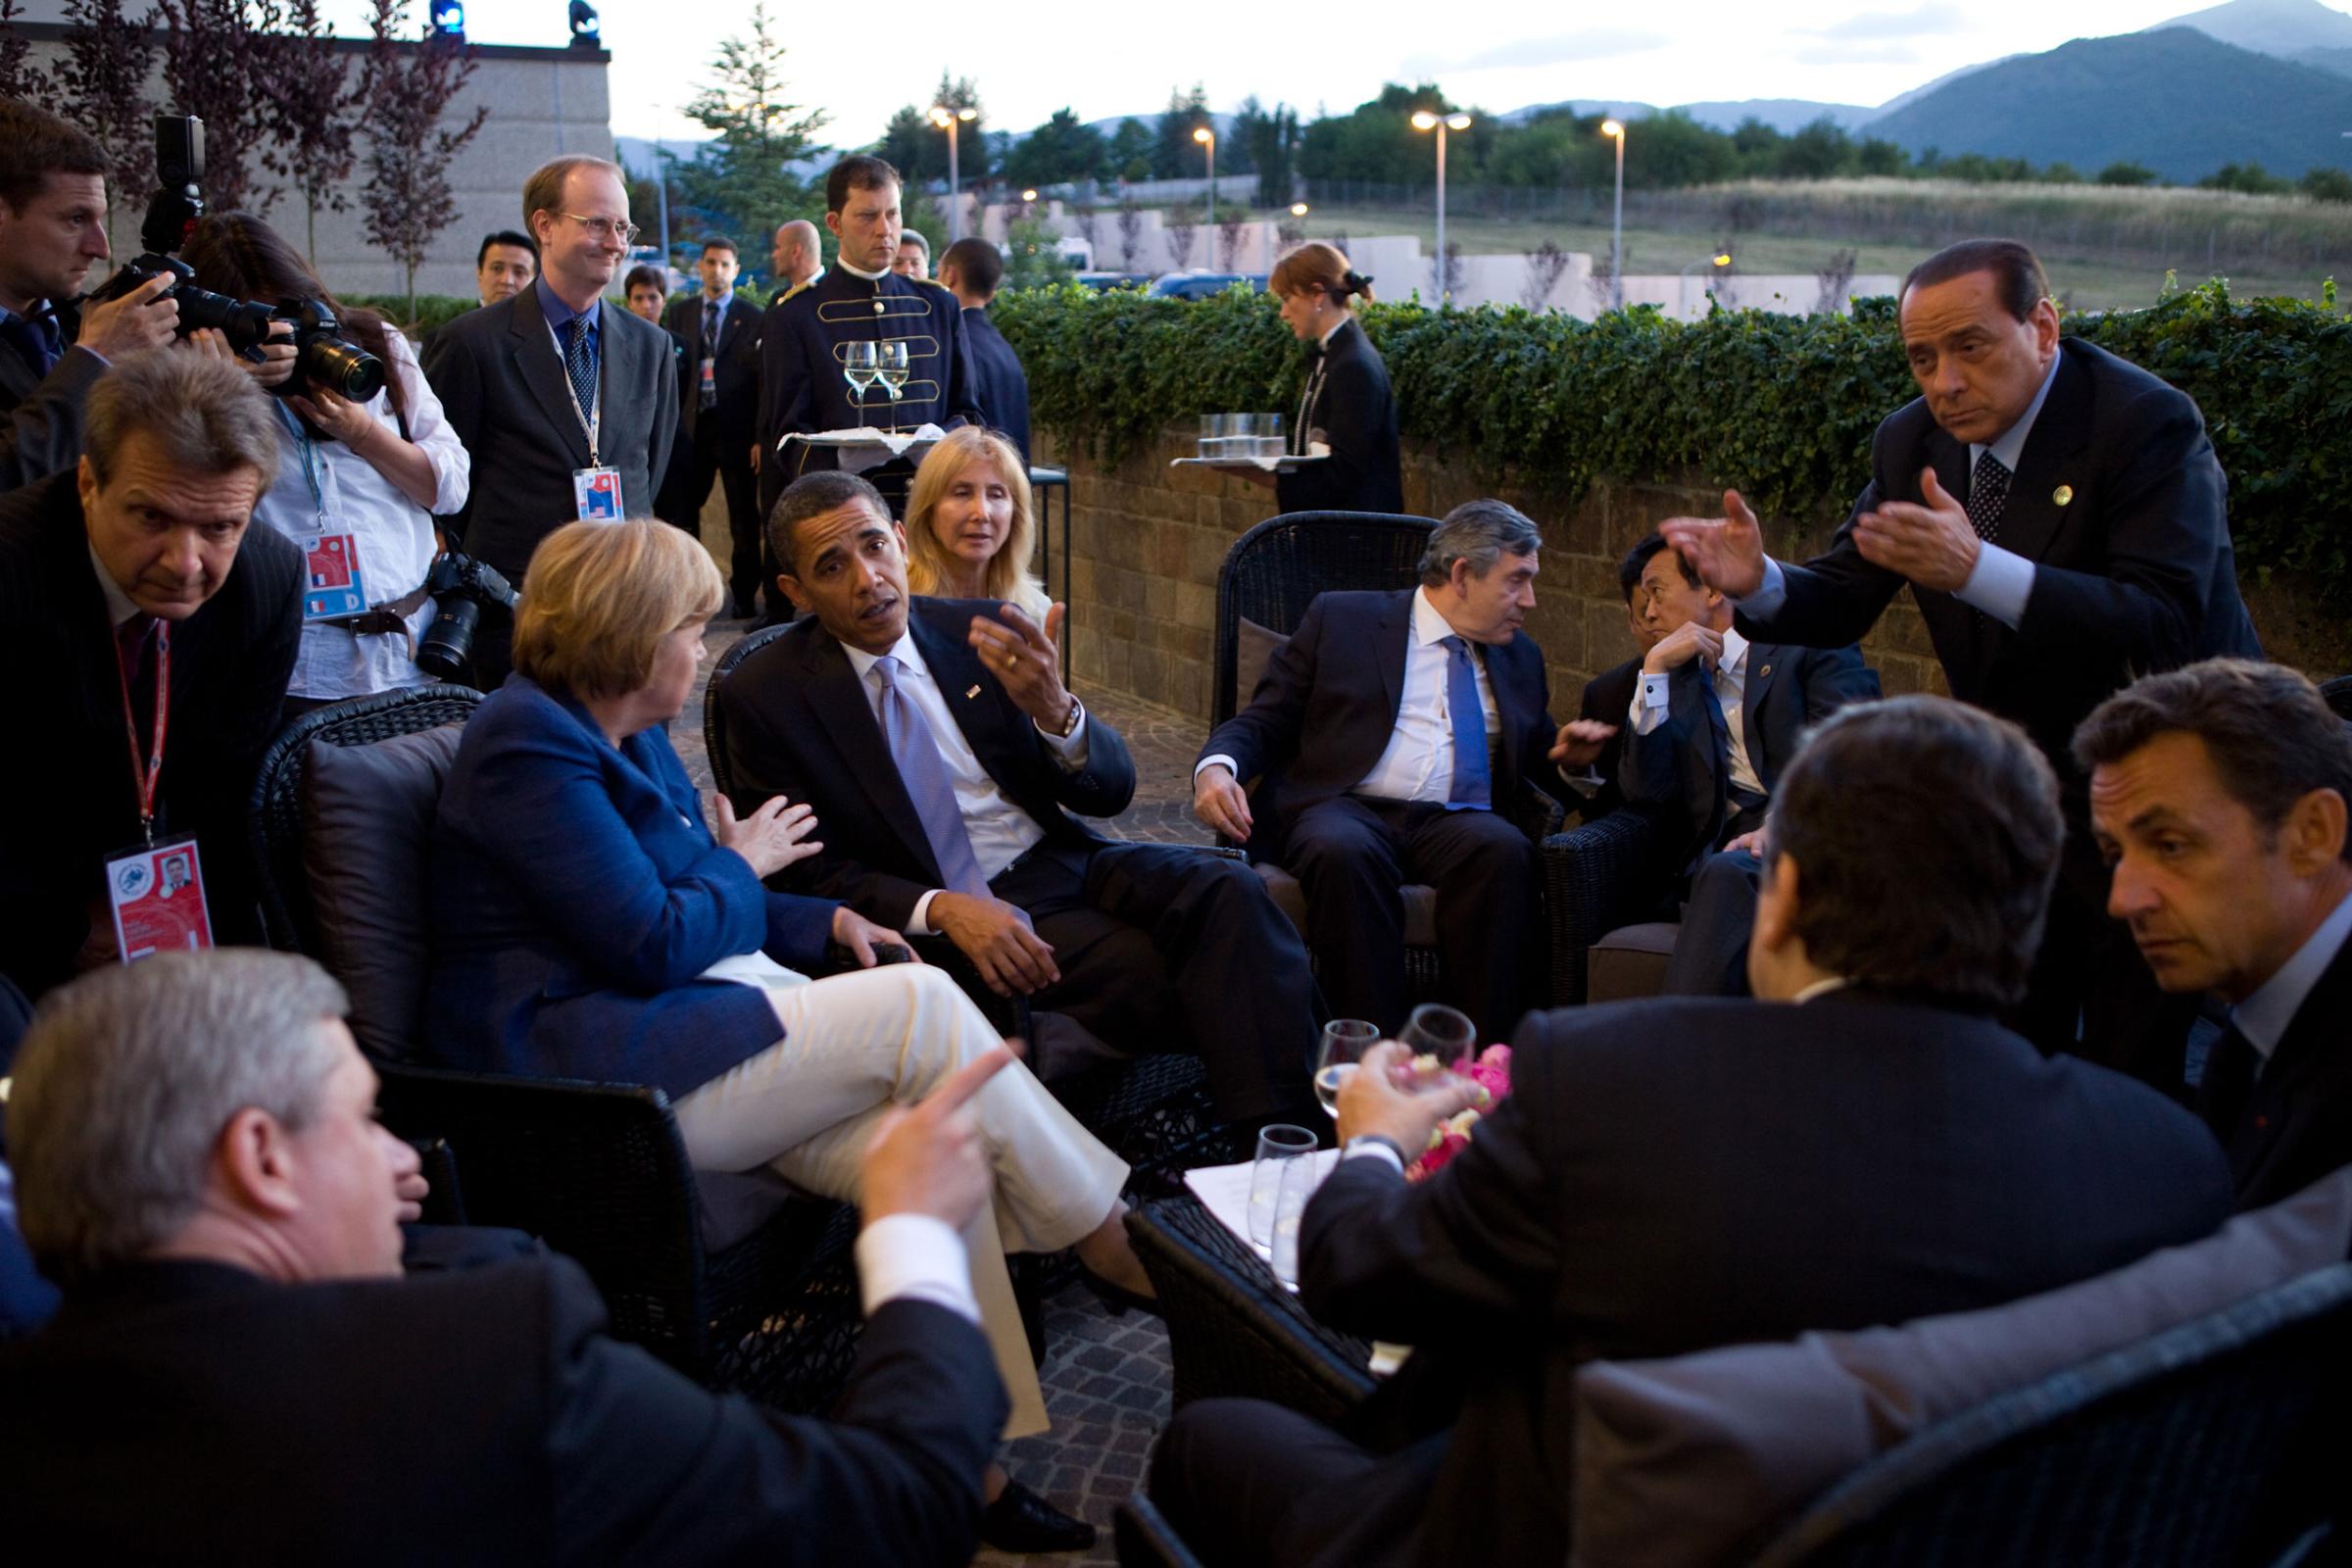 “This was a great scene just before dinner at the G-8 Summit in L’Aquila, Italy. As the leaders arrived, they spontaneously moved to a small patio outside. Several different conversations were taking place. Finally as dusk settled in, Italian Prime Minister Silvio Berlusconi, at far right, motioned for everyone to move inside for the dinner,”July 8, 2009.